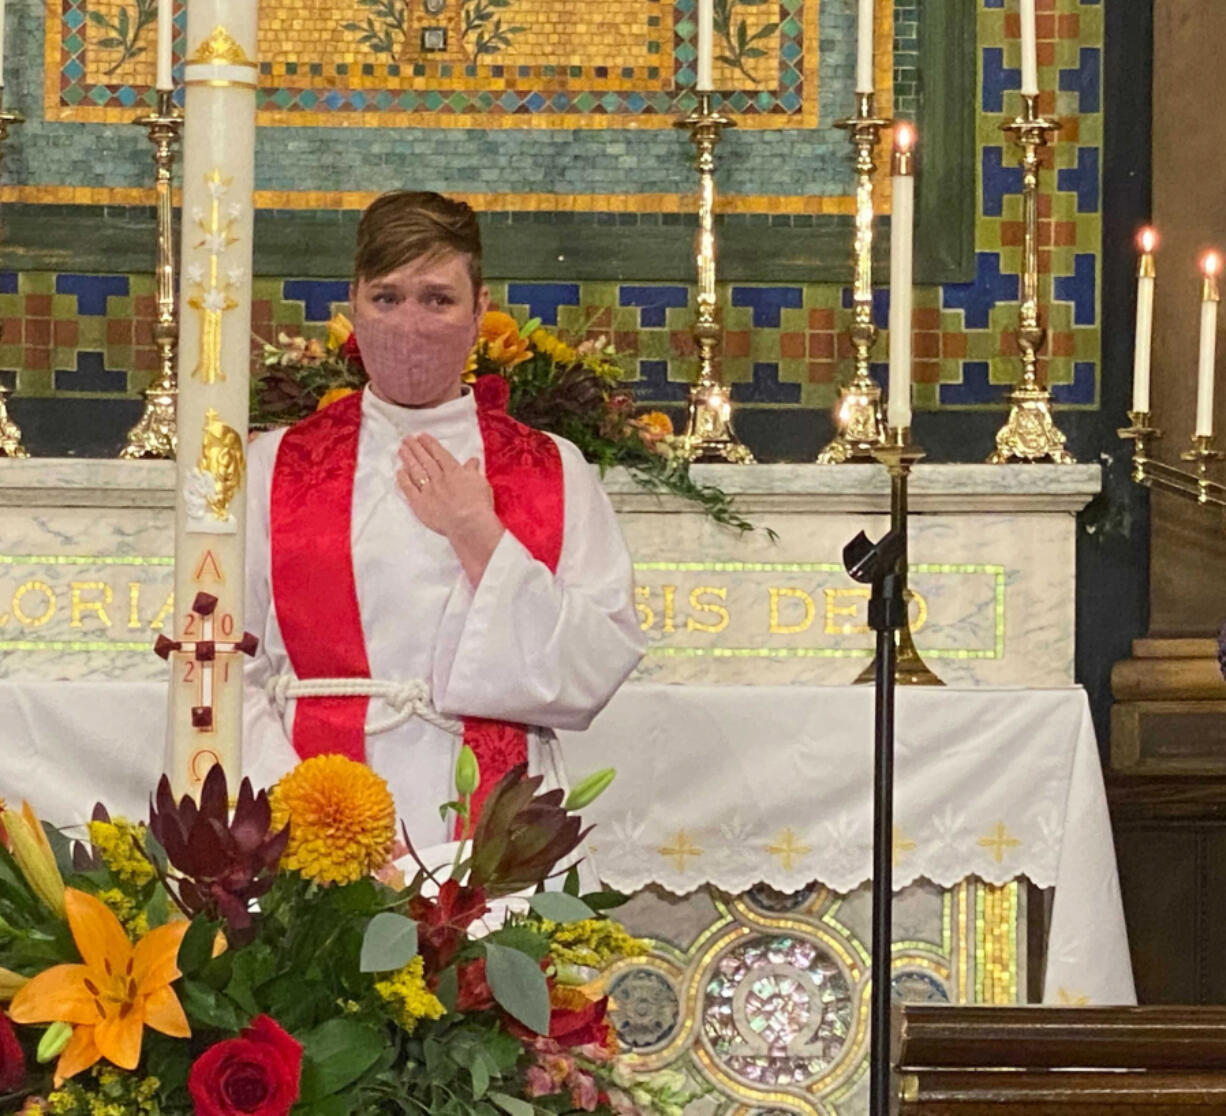 Rev. Emily Scott, the new pastor of St. Mark's Evangelical Lutheran Church in Baltimore, underwent her Rite of Installation on Oct. 17, signifying her new role leading the congregation. The service also included a covenant signing between the historic St. Mark's church and Dreams and Visions, a church community Scott founded in 2019.